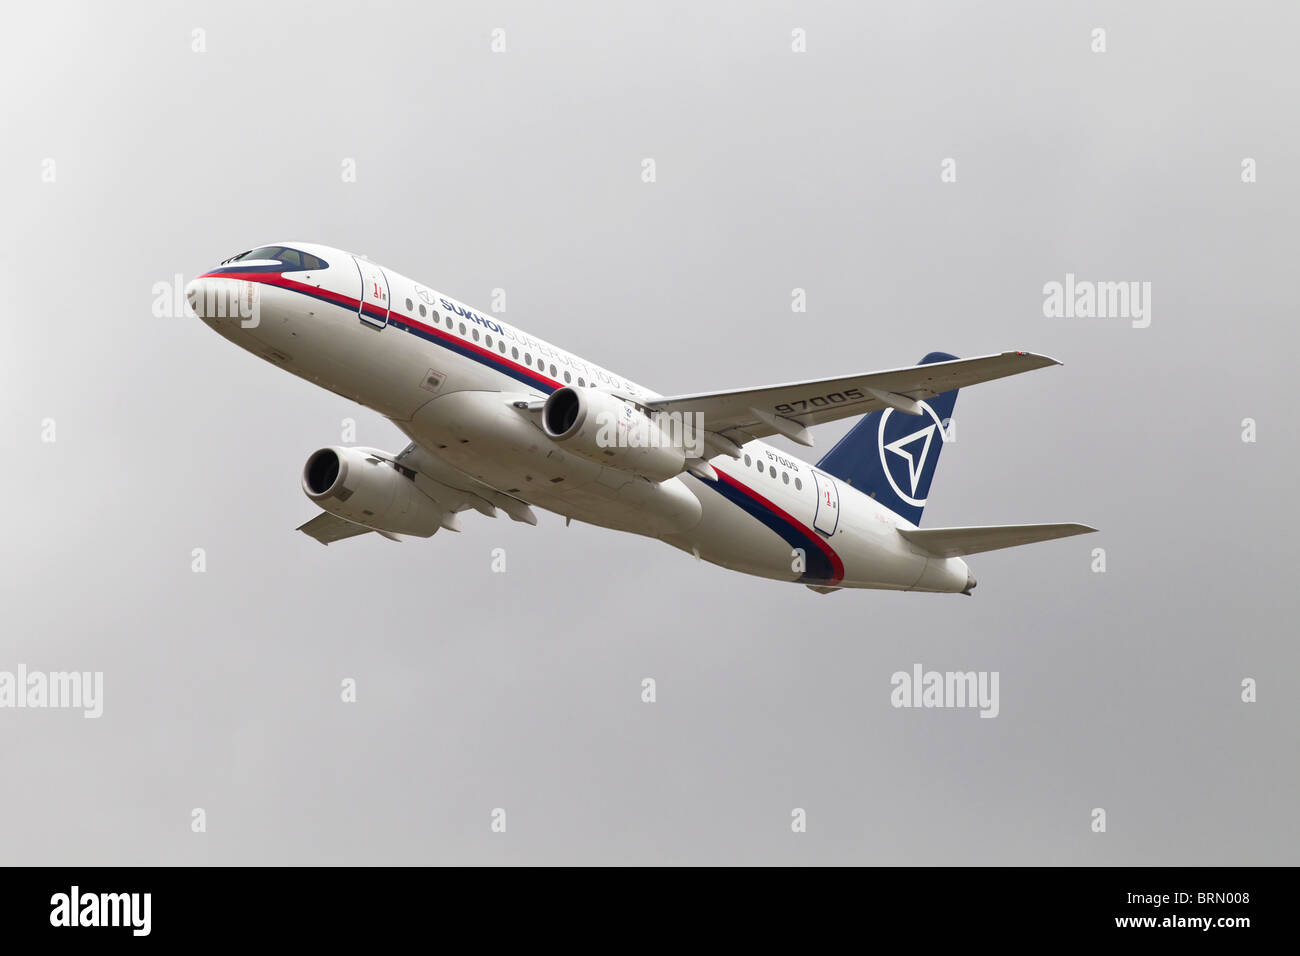 The brand new Russian Sukhoi Superjet regional airliner Stock Photo